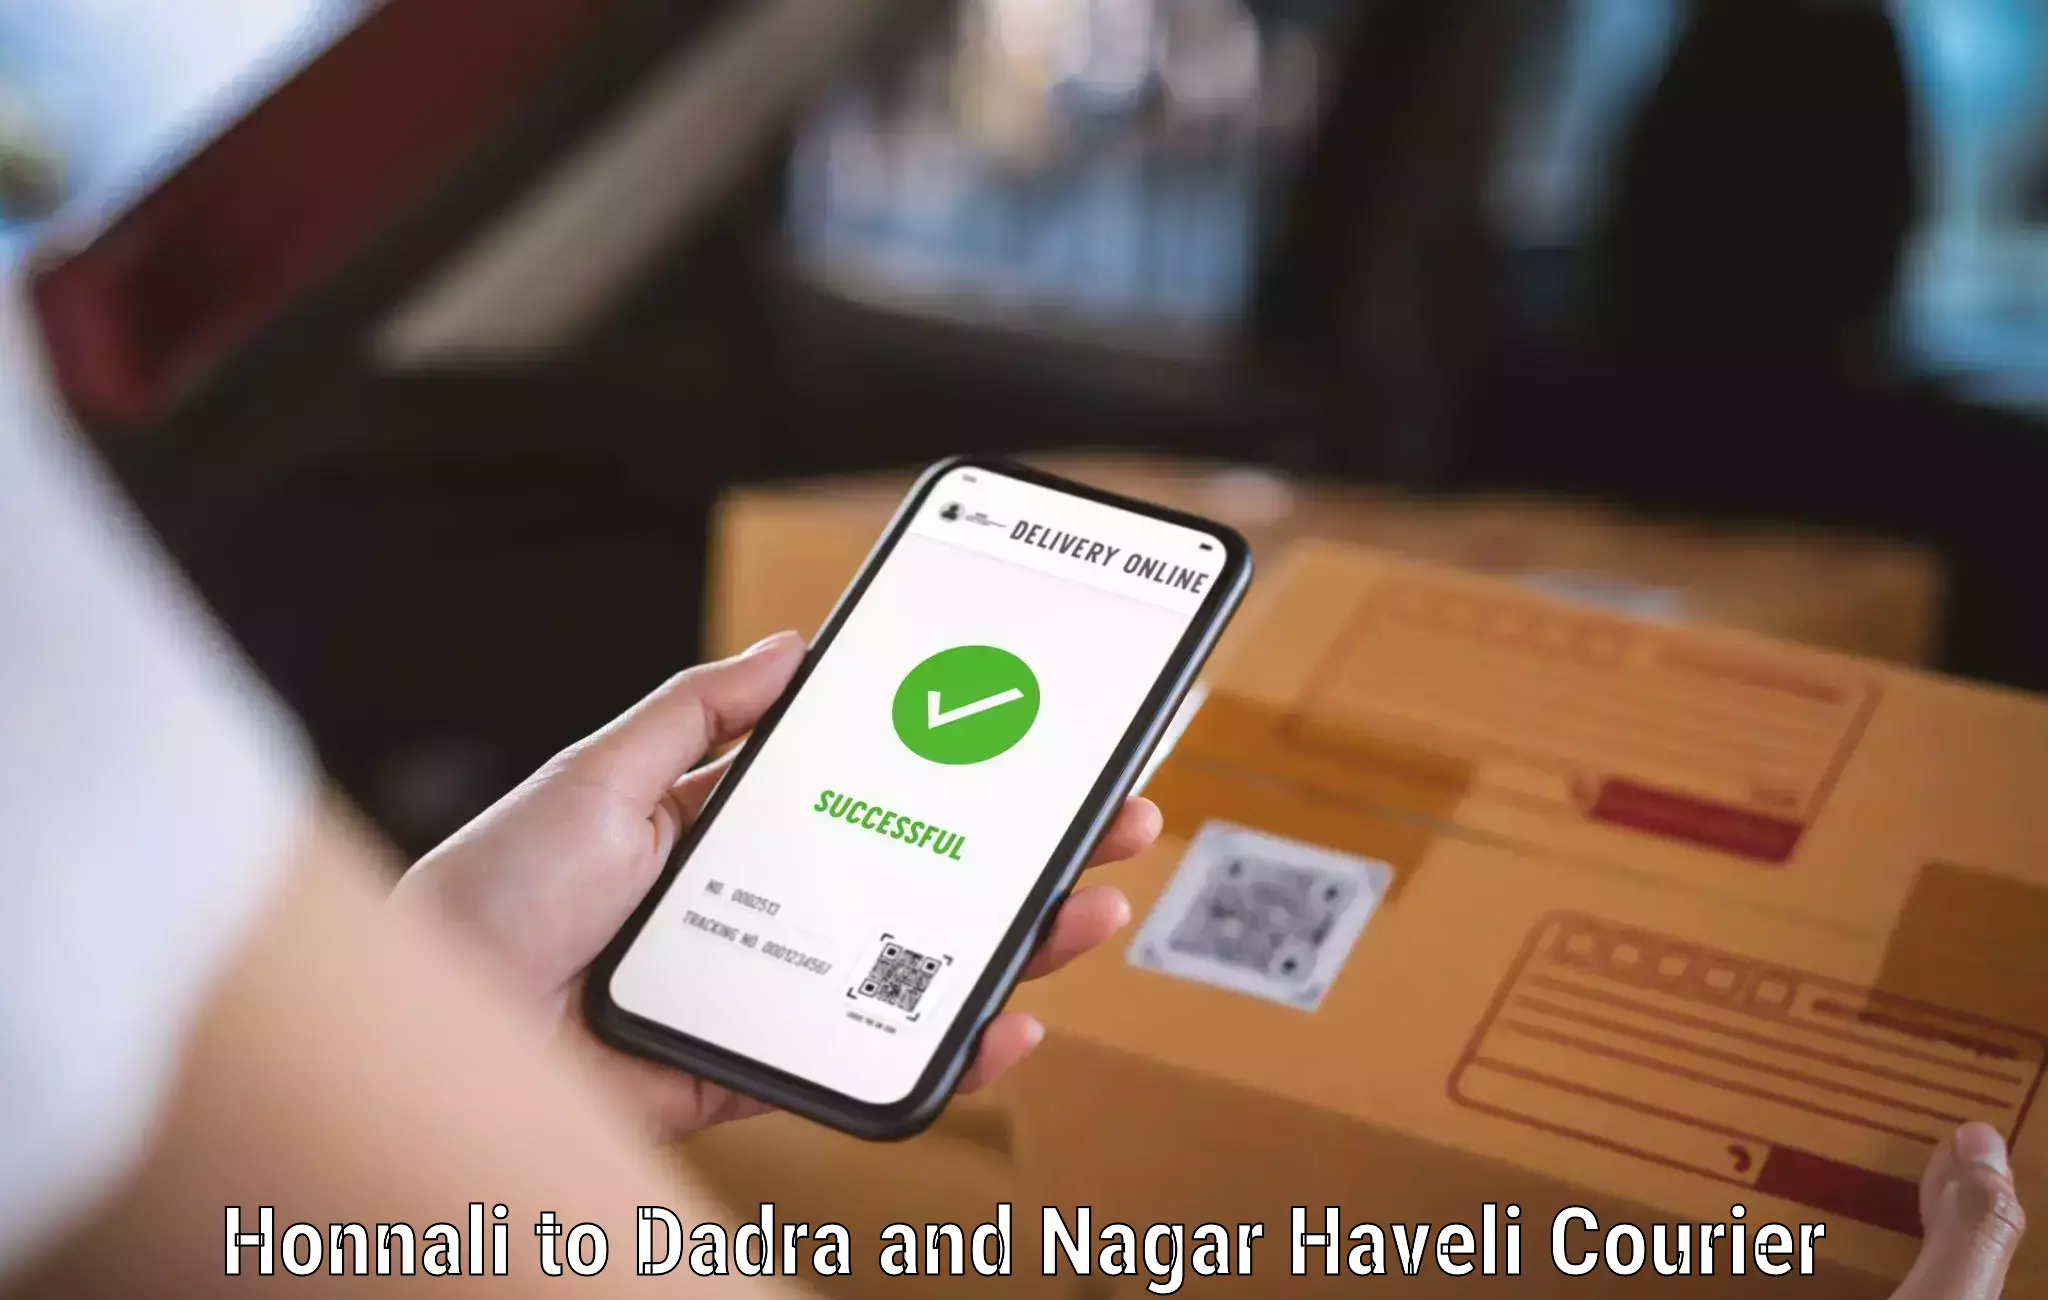 Premium delivery services Honnali to Dadra and Nagar Haveli